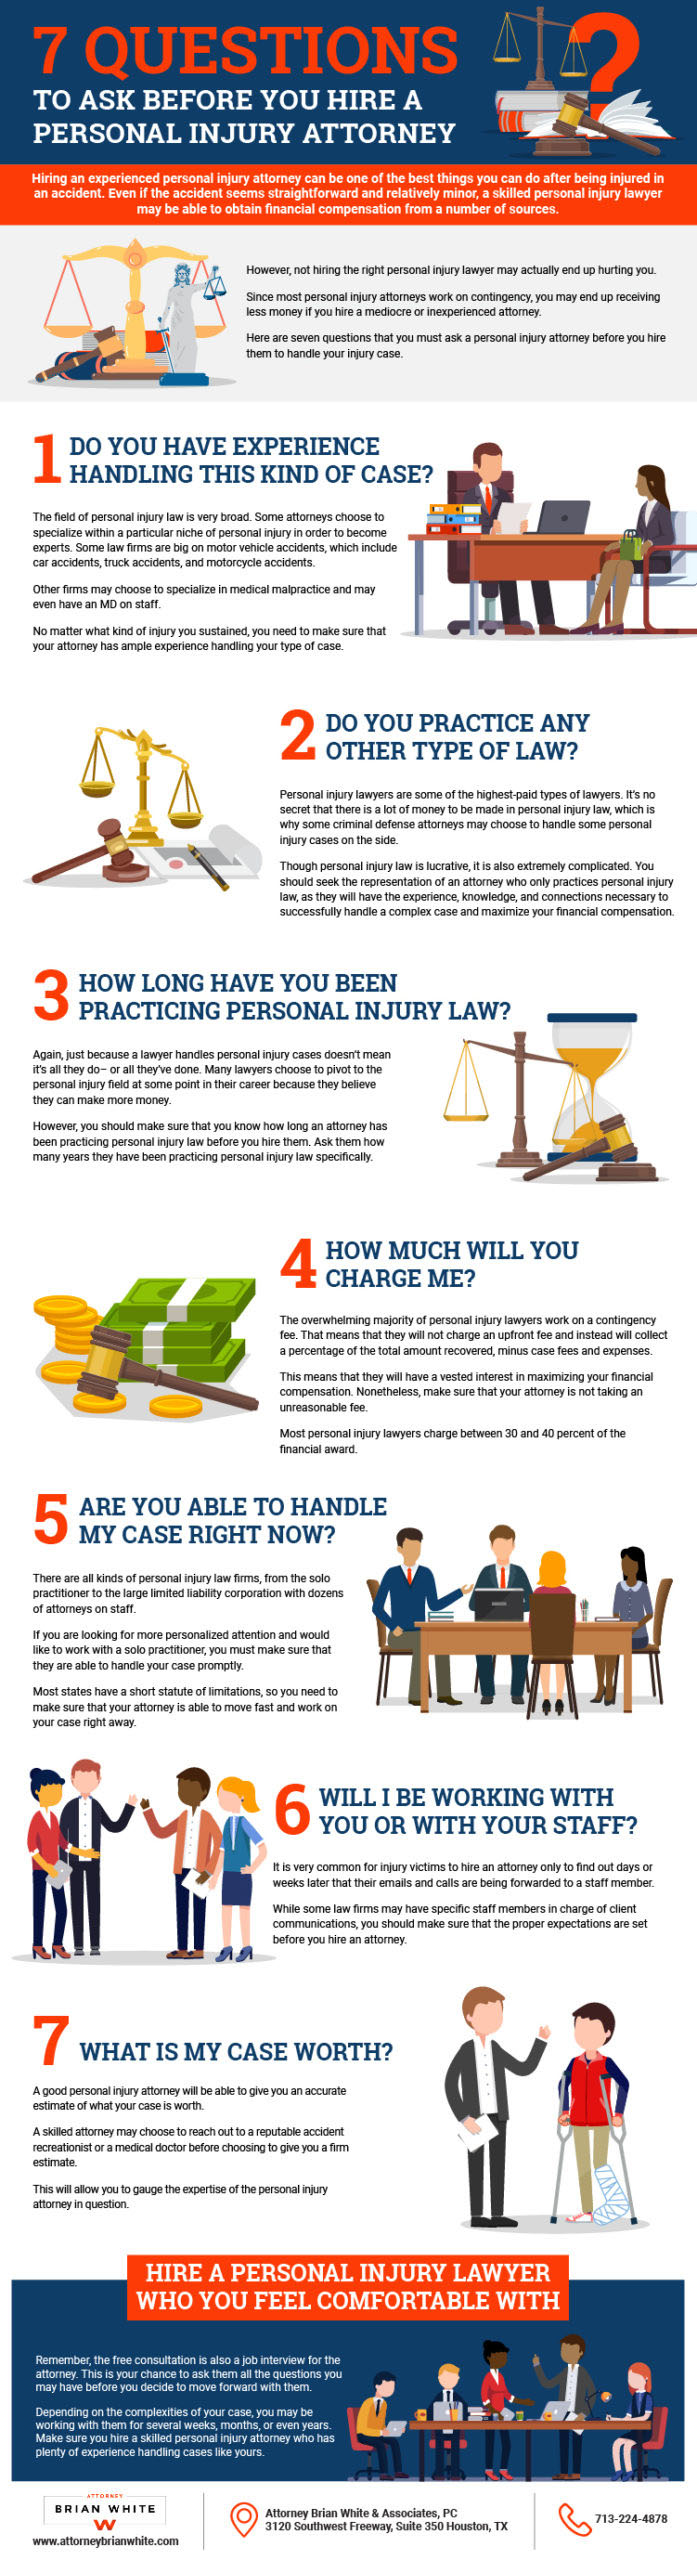 7 Questions to Ask Before You Hire a Personal Injury Attorney